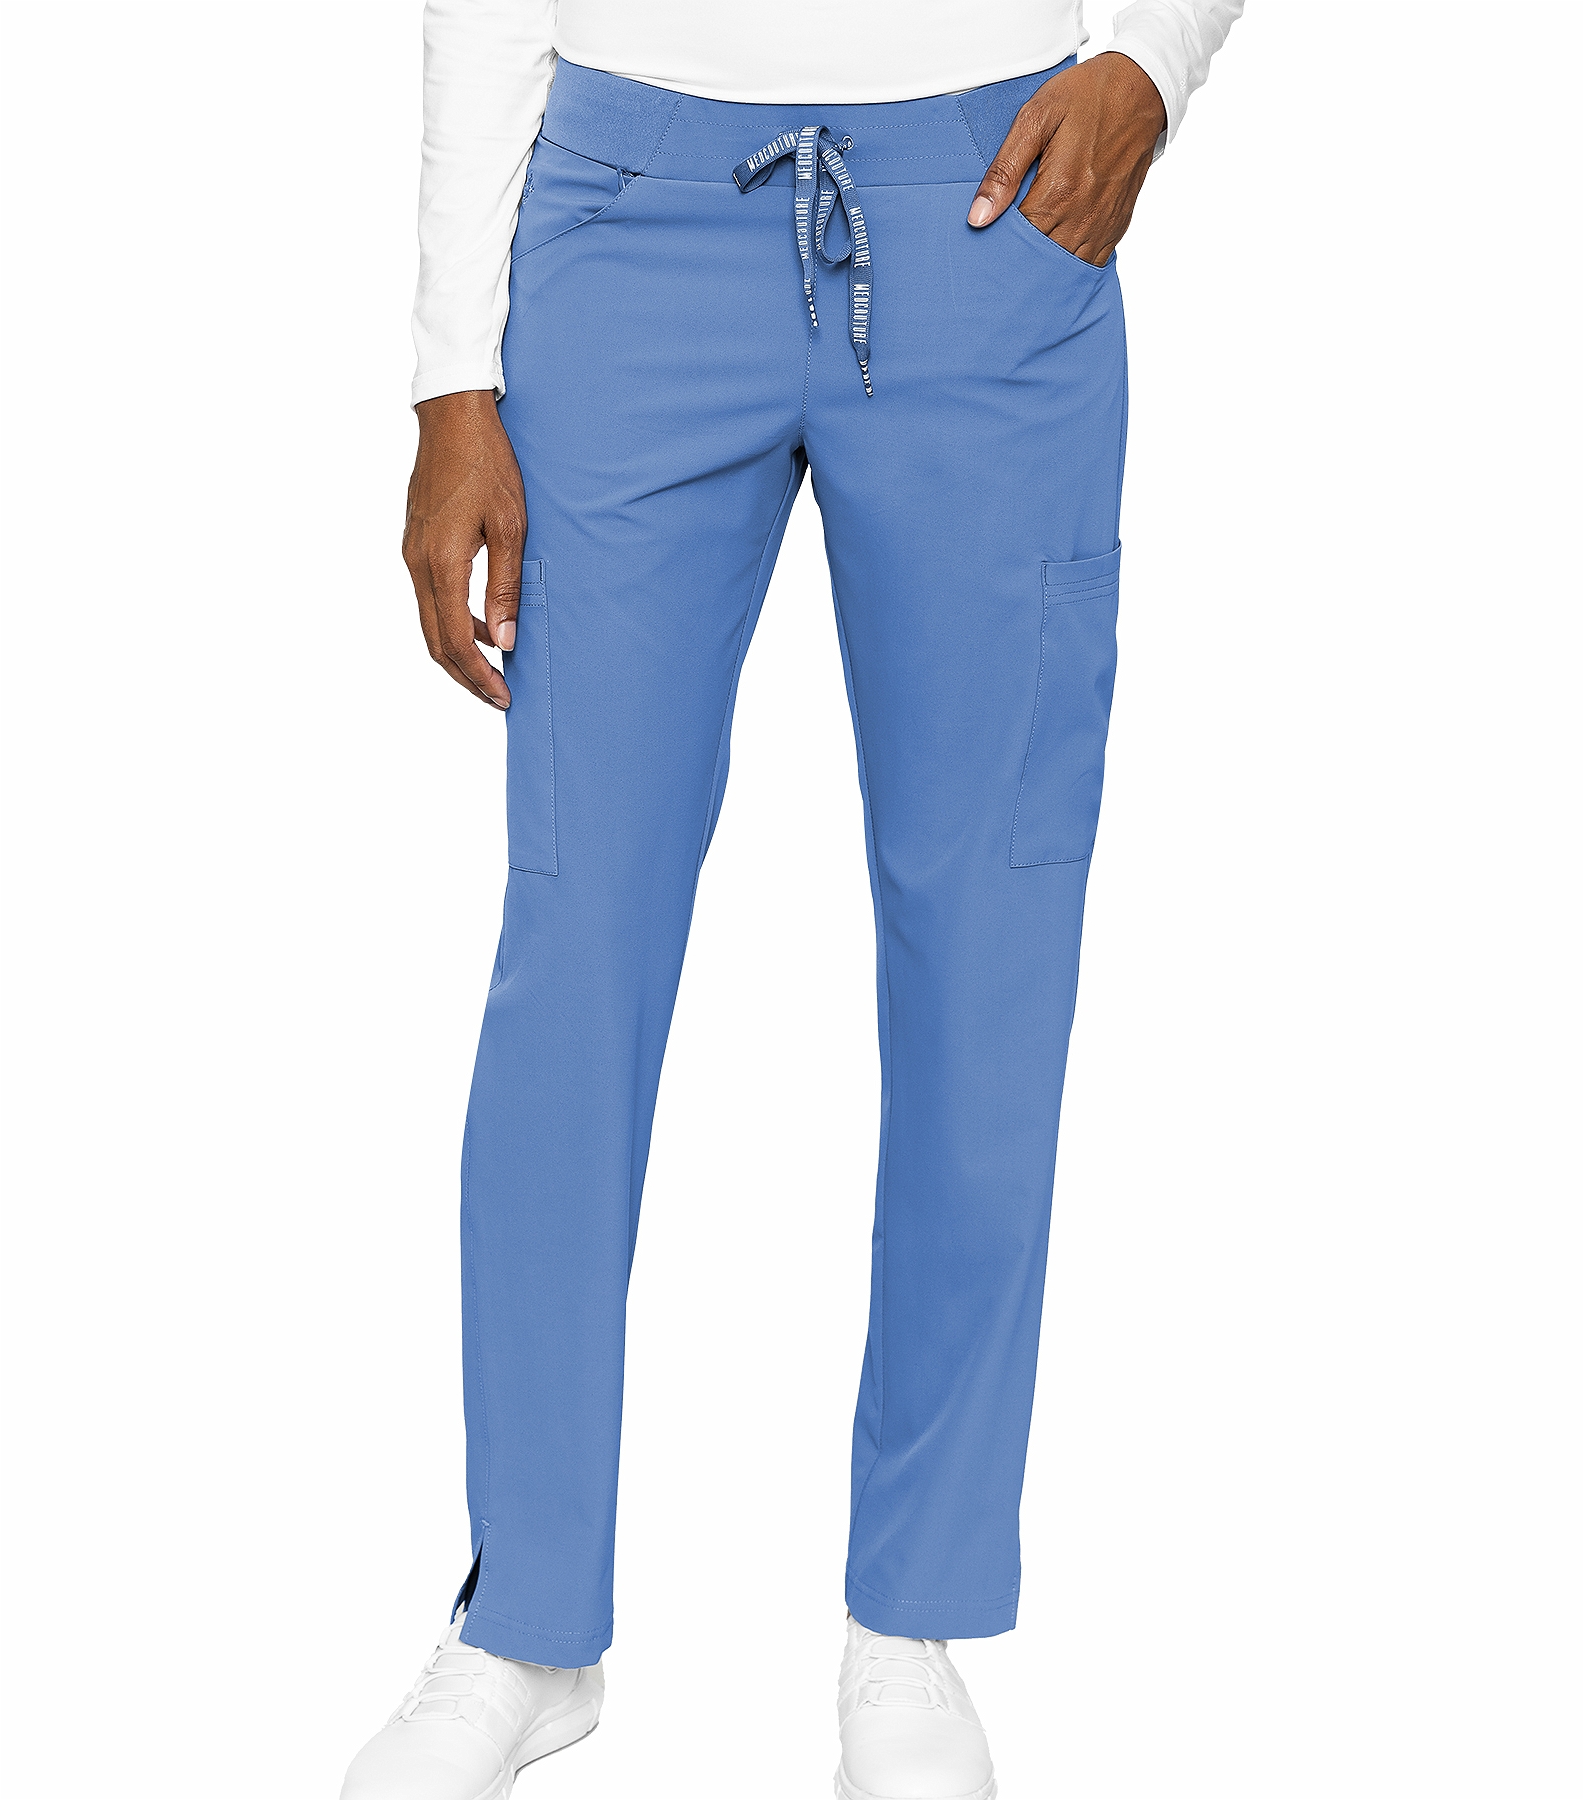 Med Couture Peaches Women's Scoop Pocket Pant-8733 | Medical Scrubs ...